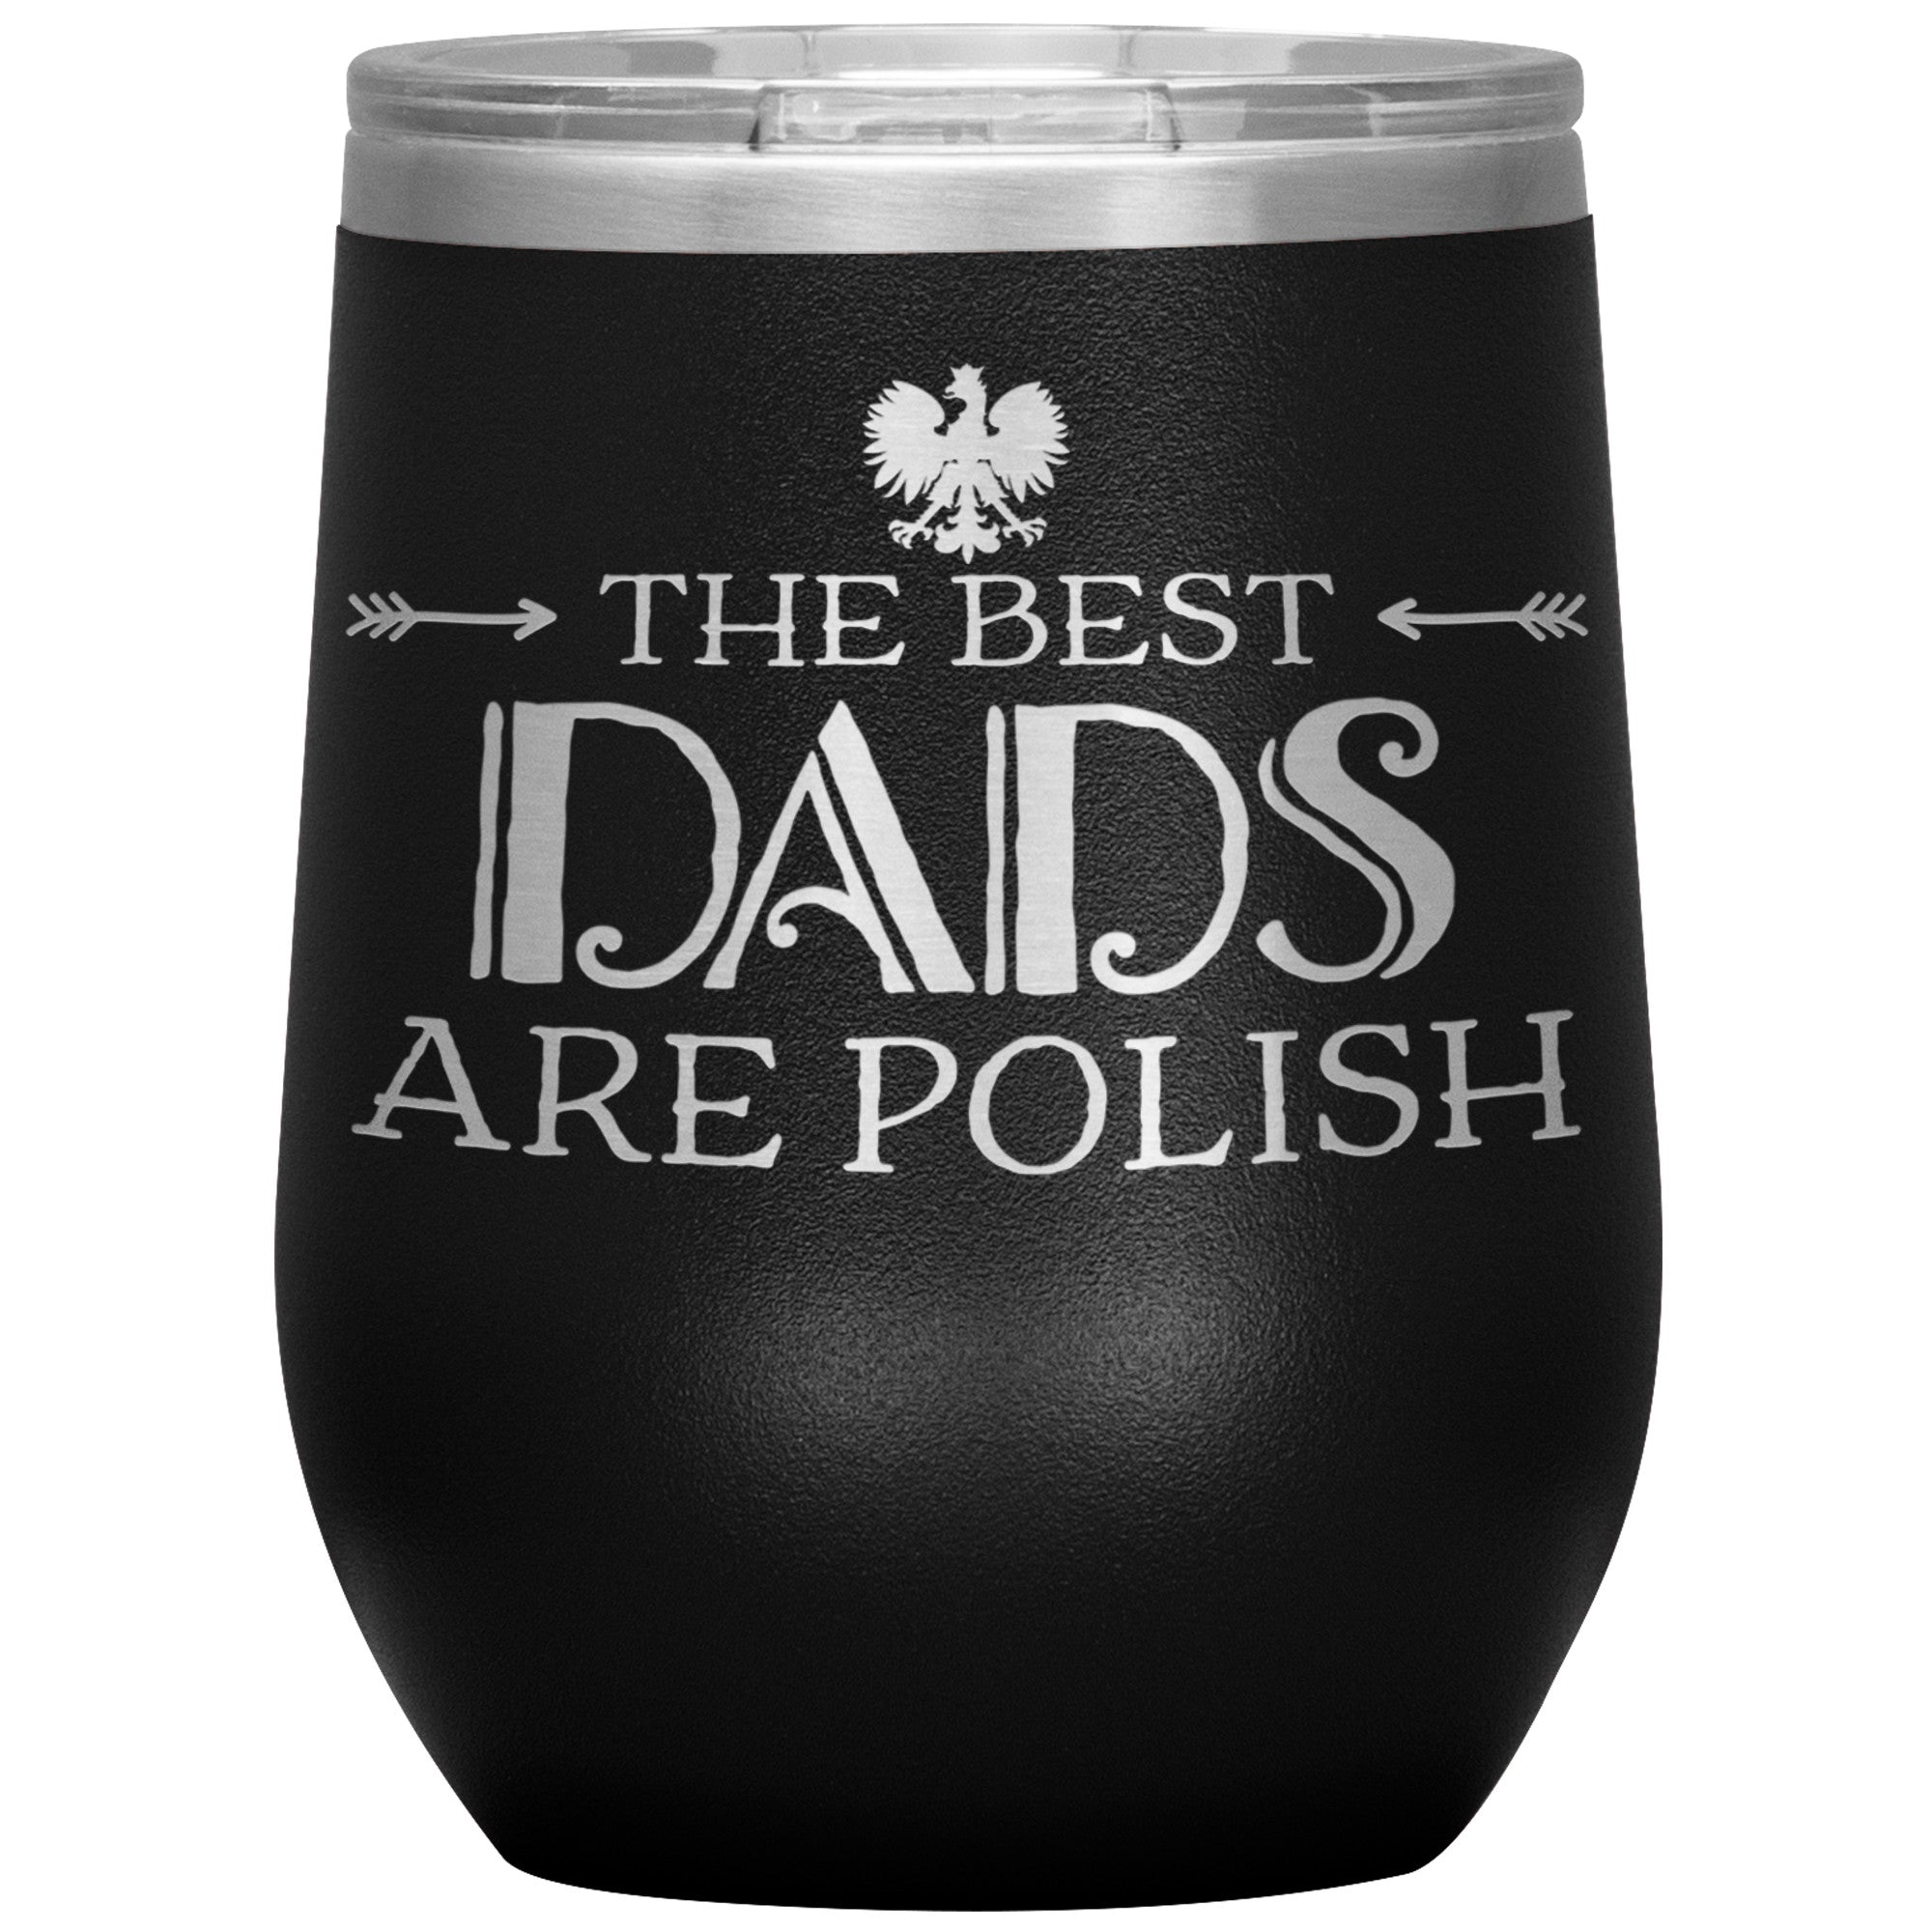 The Best Dads Are Polish Insulated Wine Tumbler Tumblers teelaunch Black  